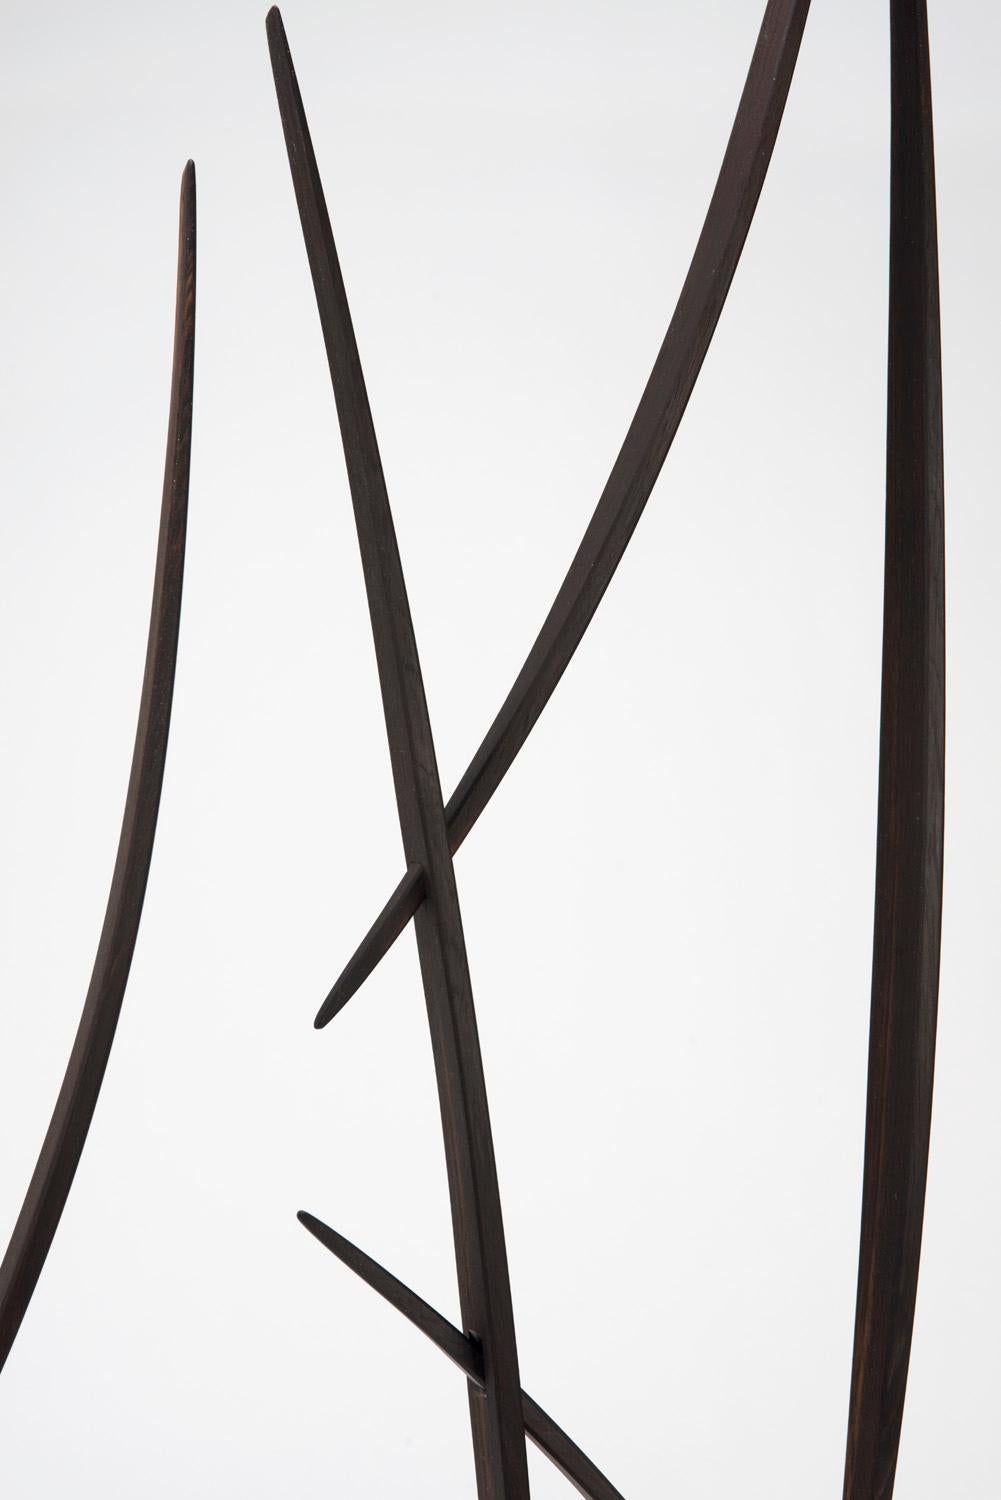 Extending Up, Version 4 - Brown Abstract Sculpture by Will Clift